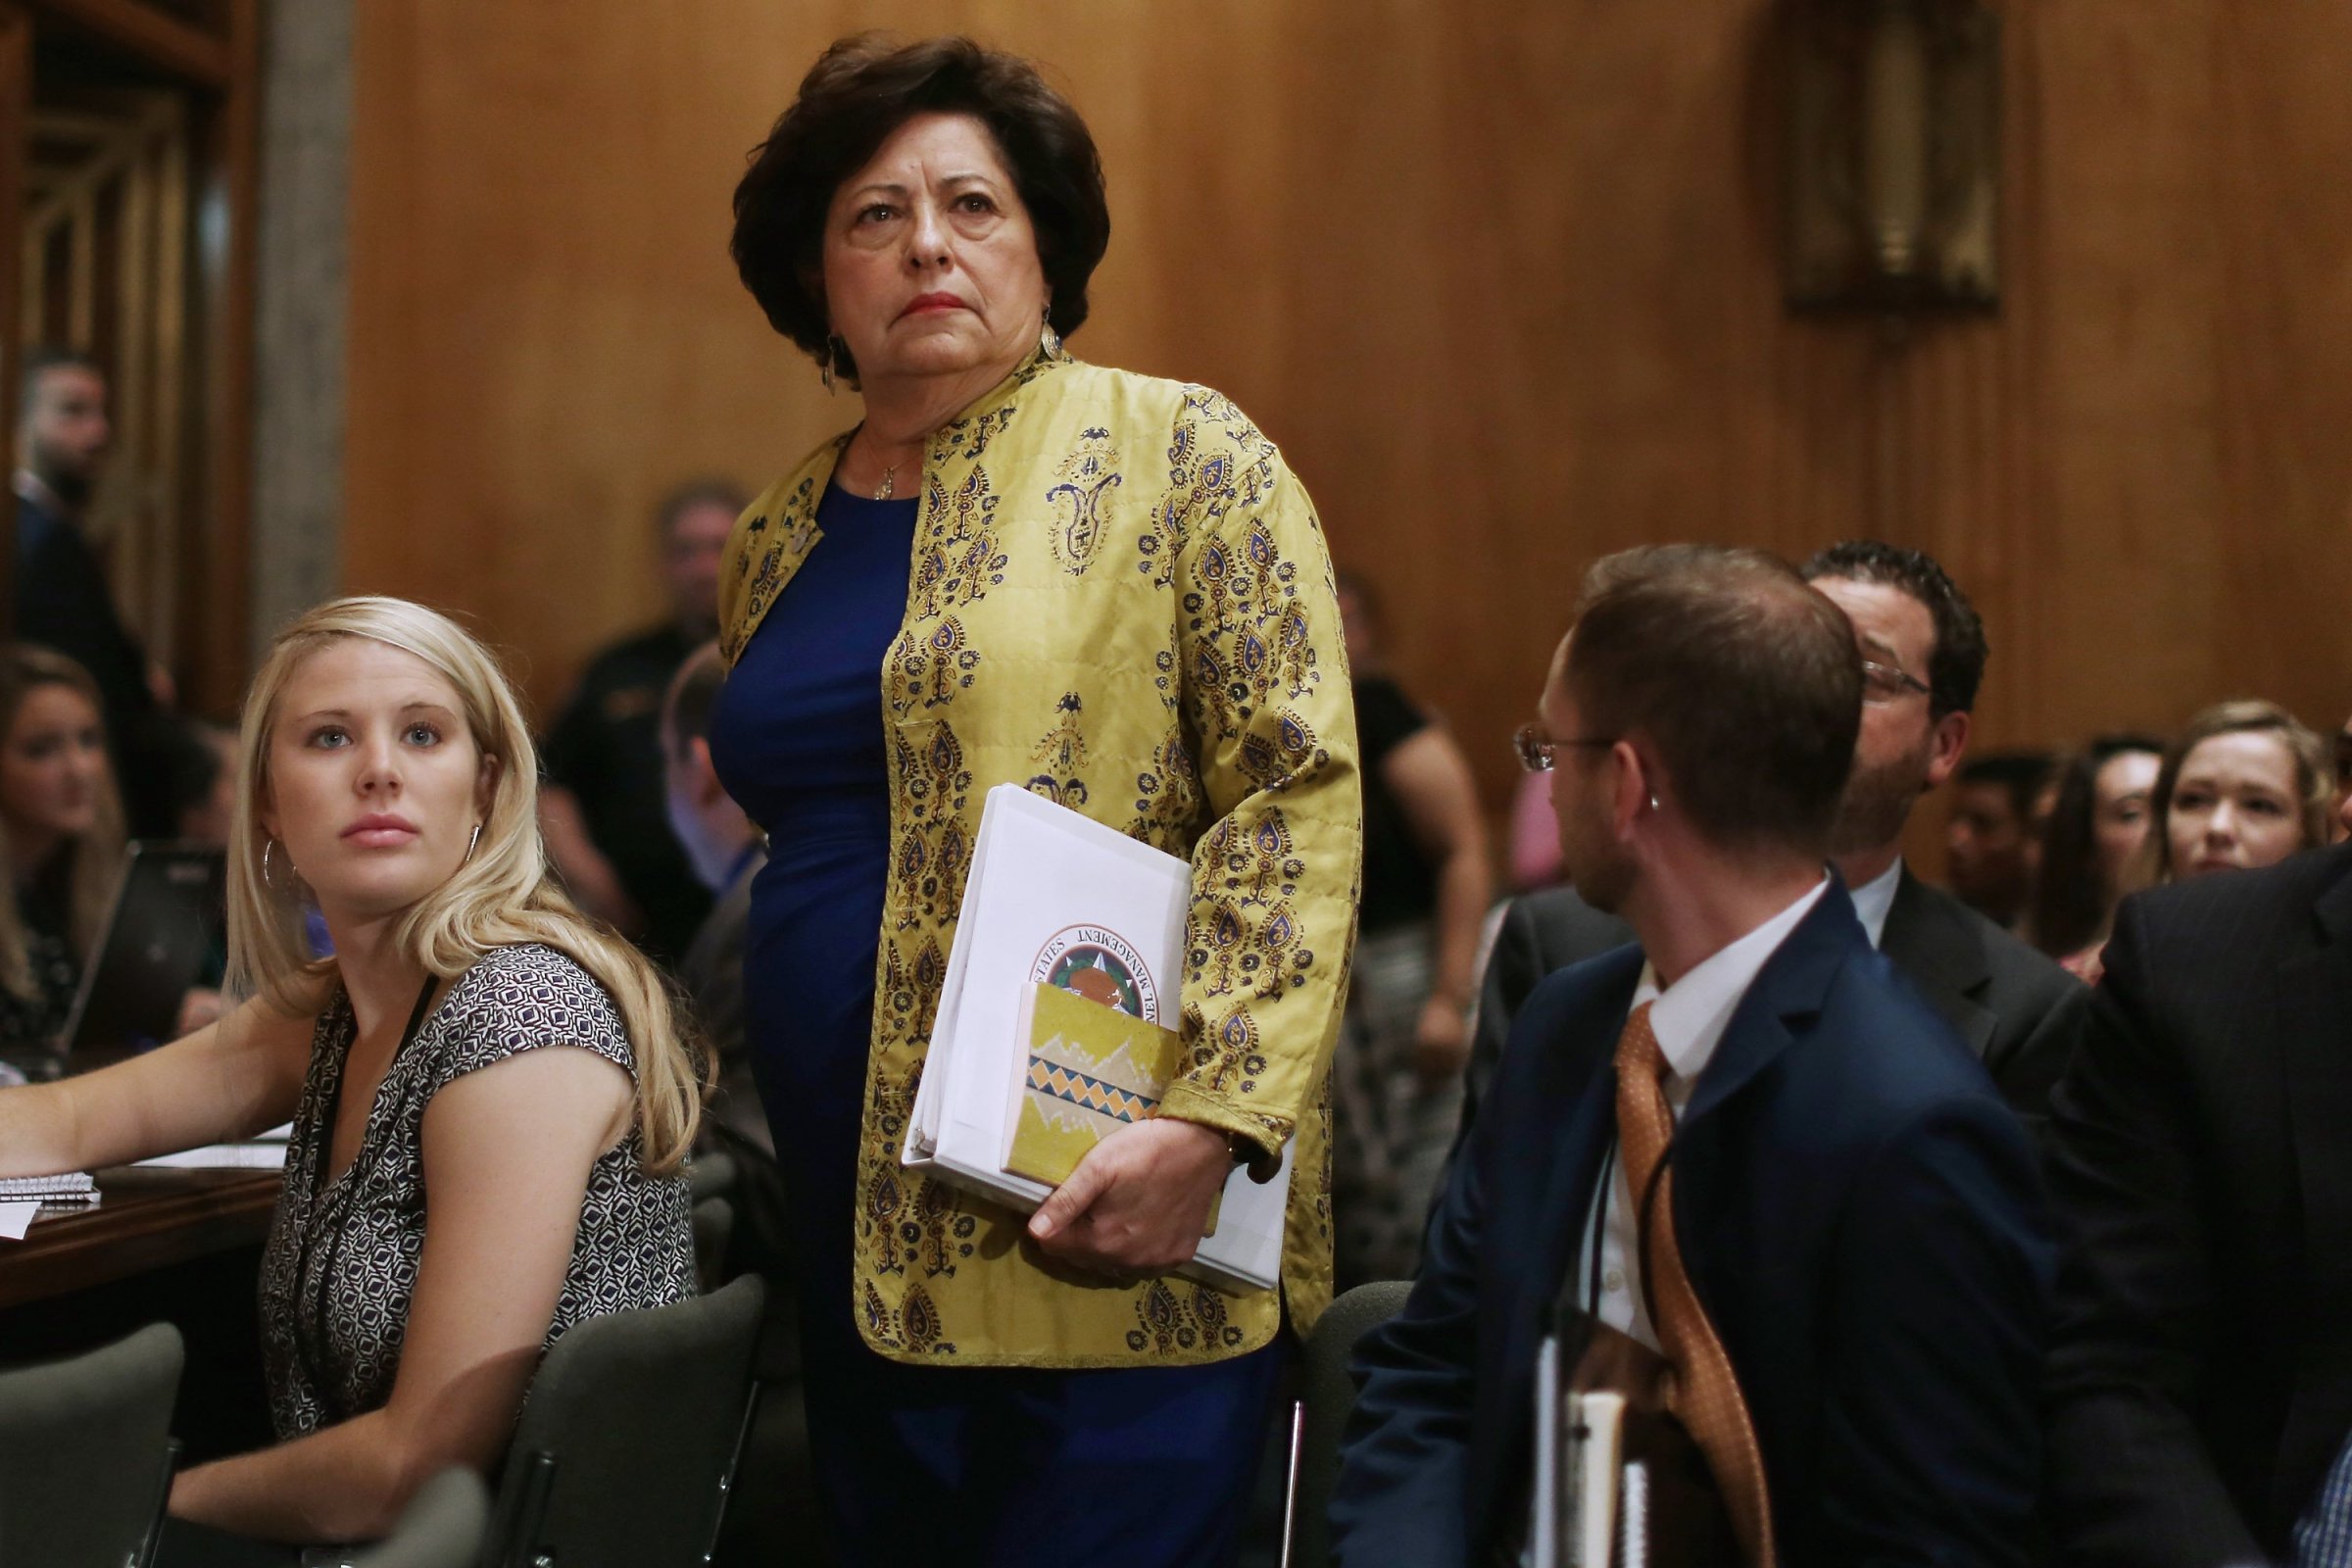 The Office of Personnel Management Director Katherine Archuleta arrives late for a hearing of the Senate Homeland Security and Governmental Affairs Committee about the recent OPM data breach in the Dirksen Senate Office Building on Capitol Hill June 25, 2015 in Washington.